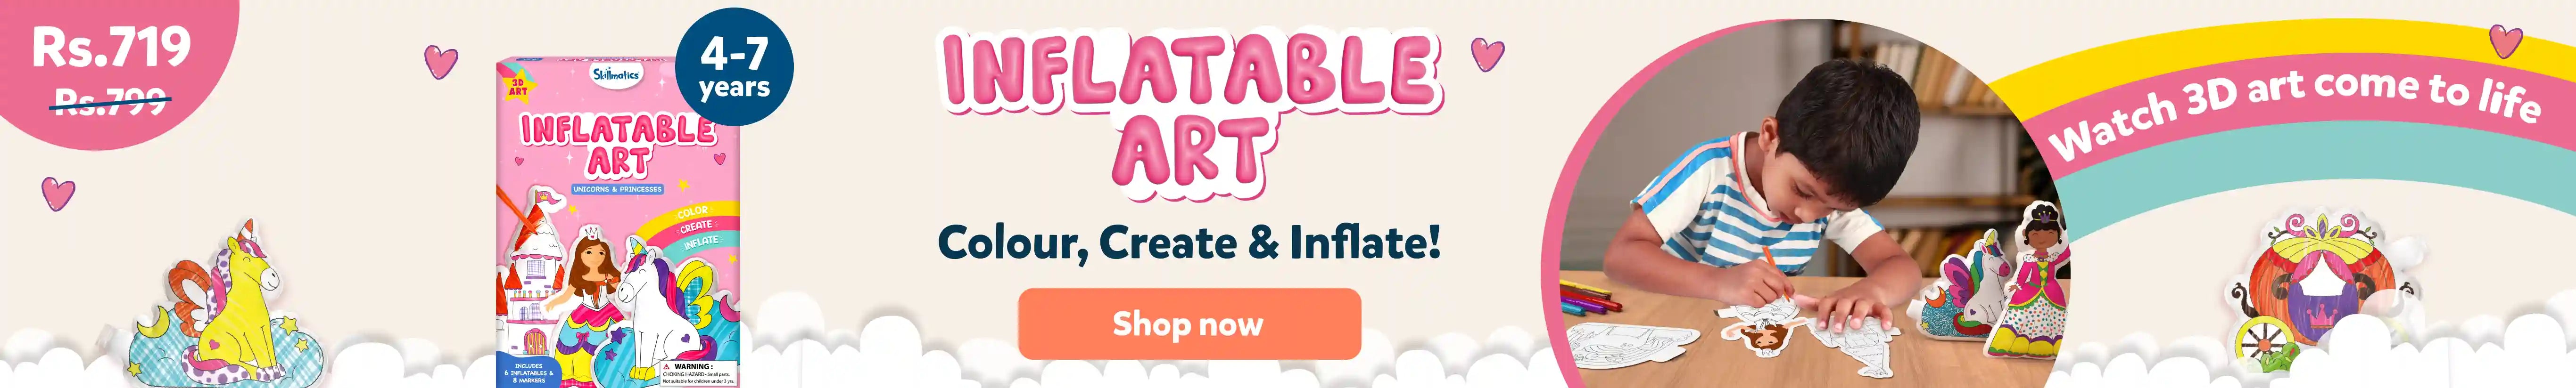 Inflatable Art